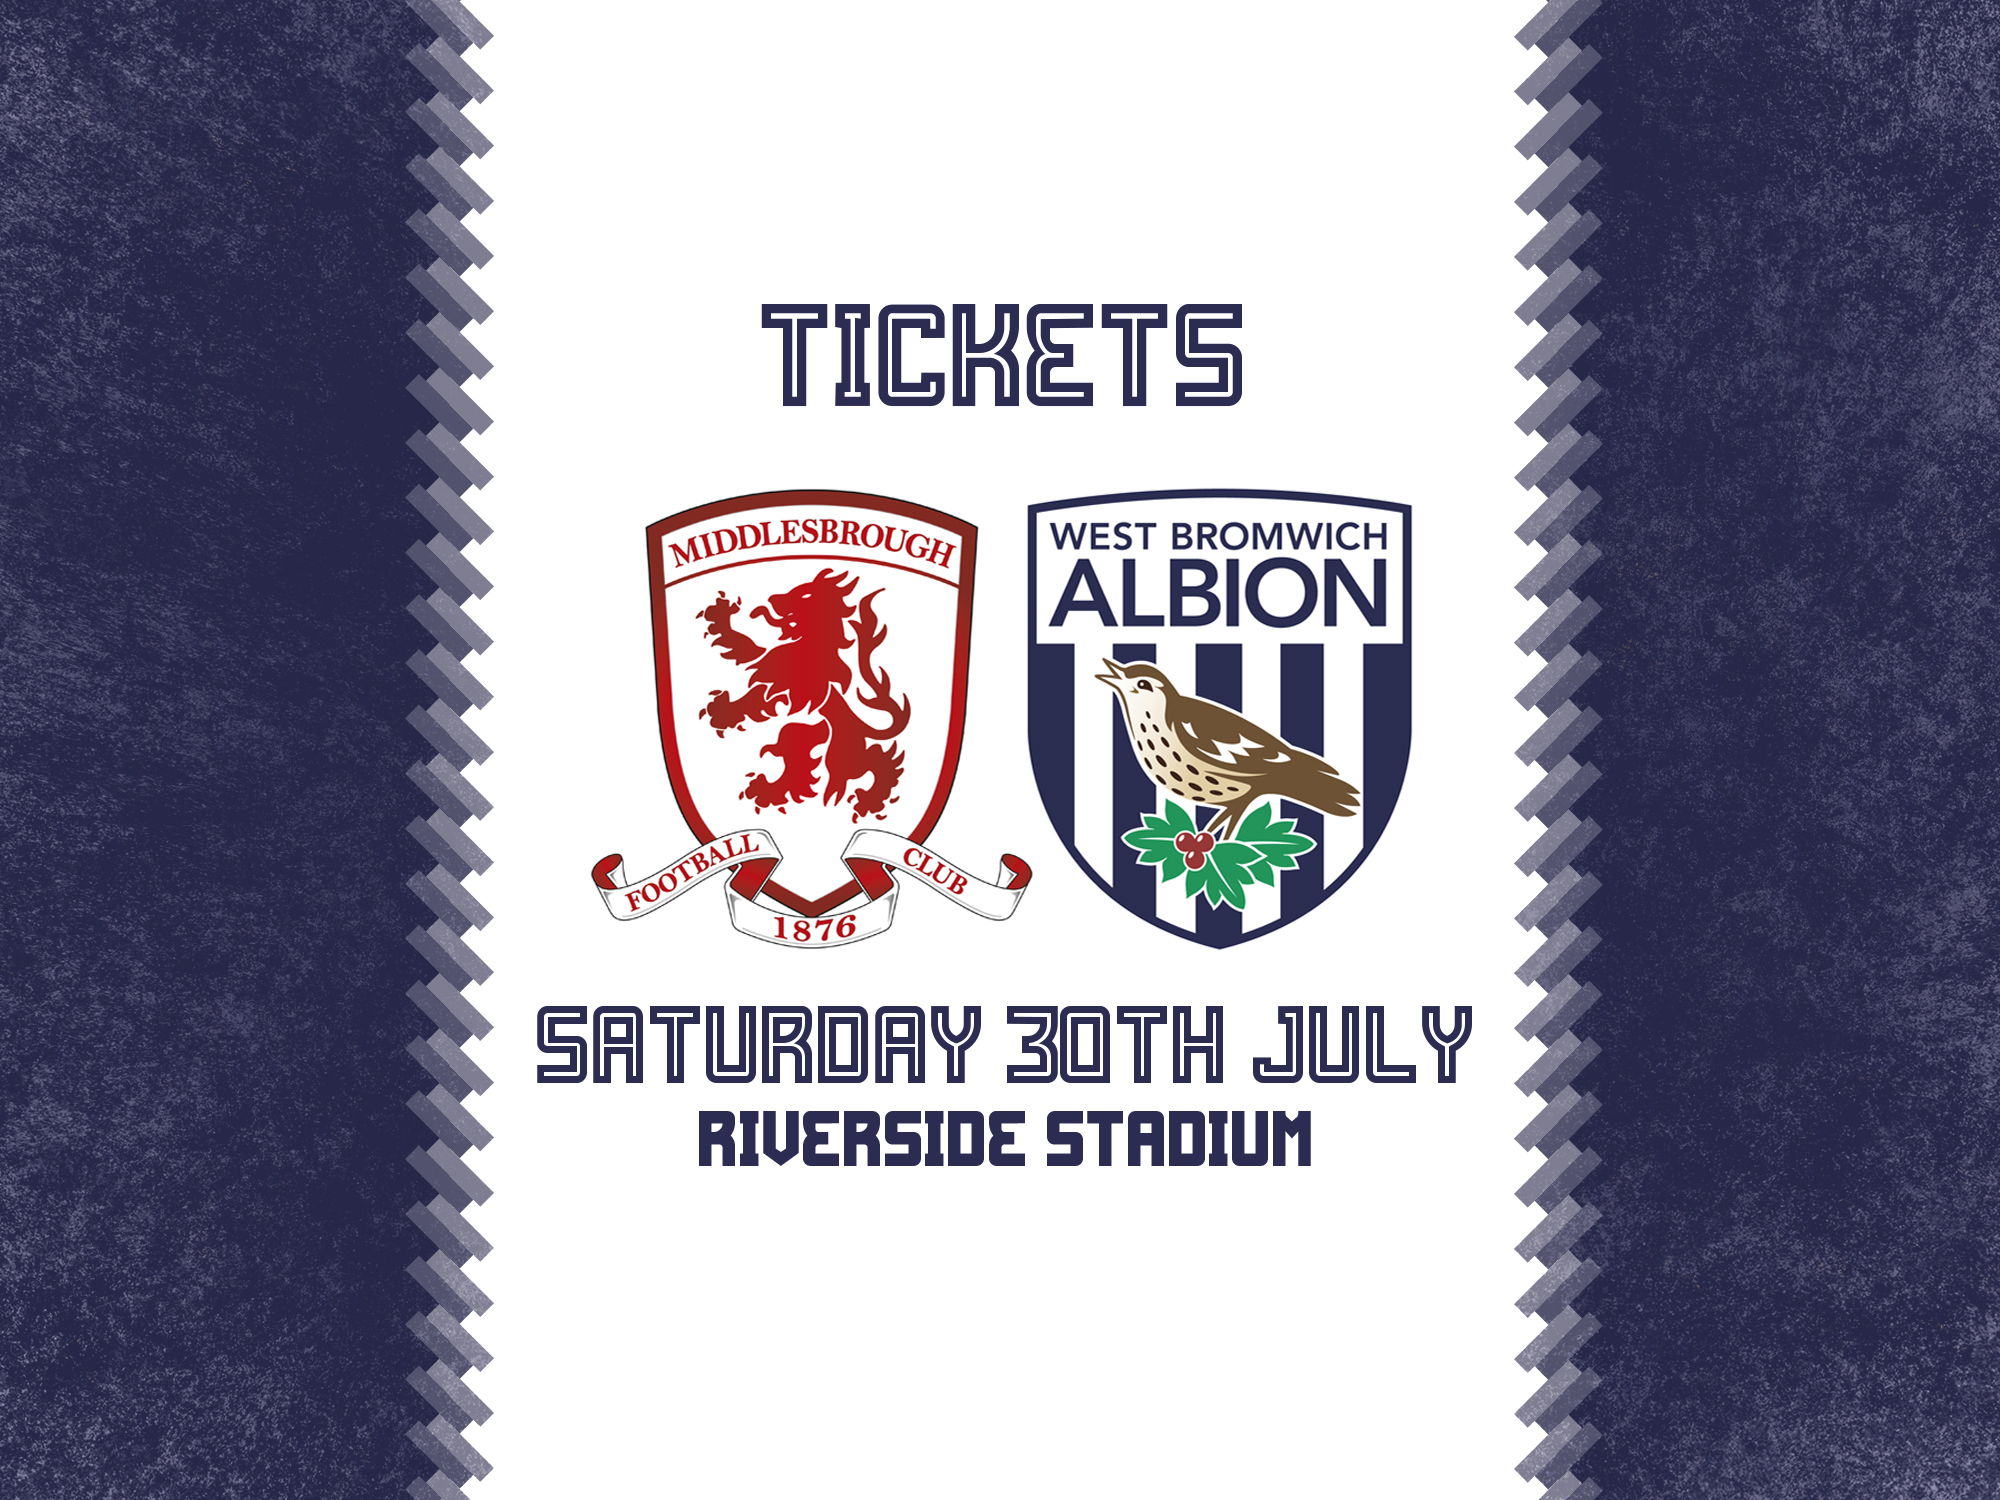 Tickets are now on sale for Albion's trip to Middlesbrough